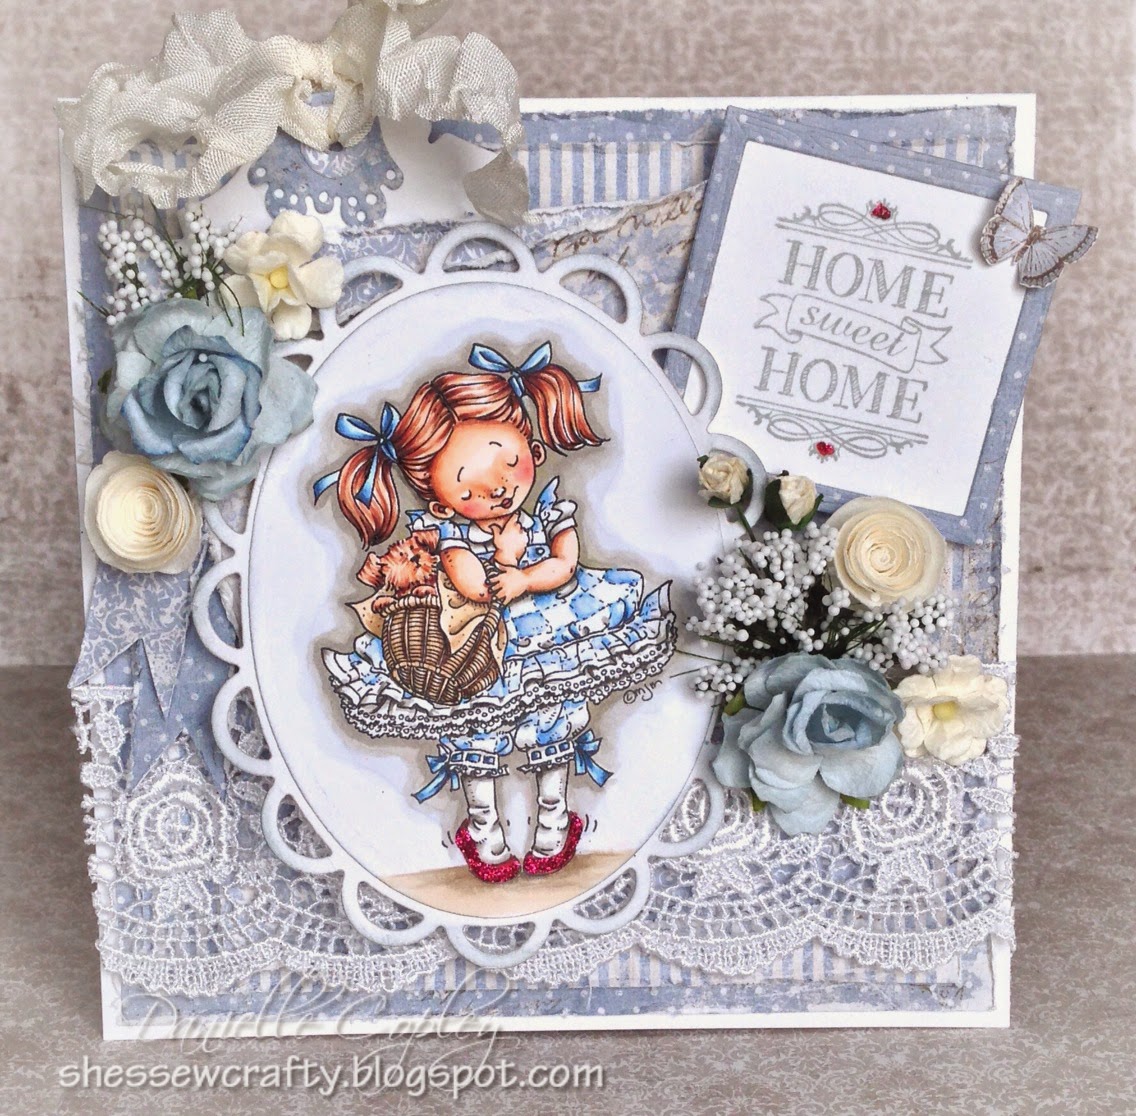 Scrapbook Maven inspiration using Mo's Digital Pencil Kansas from Wizard of Oz using Maja paper and Magnolia Tilda Tag and Whimsy Stamp